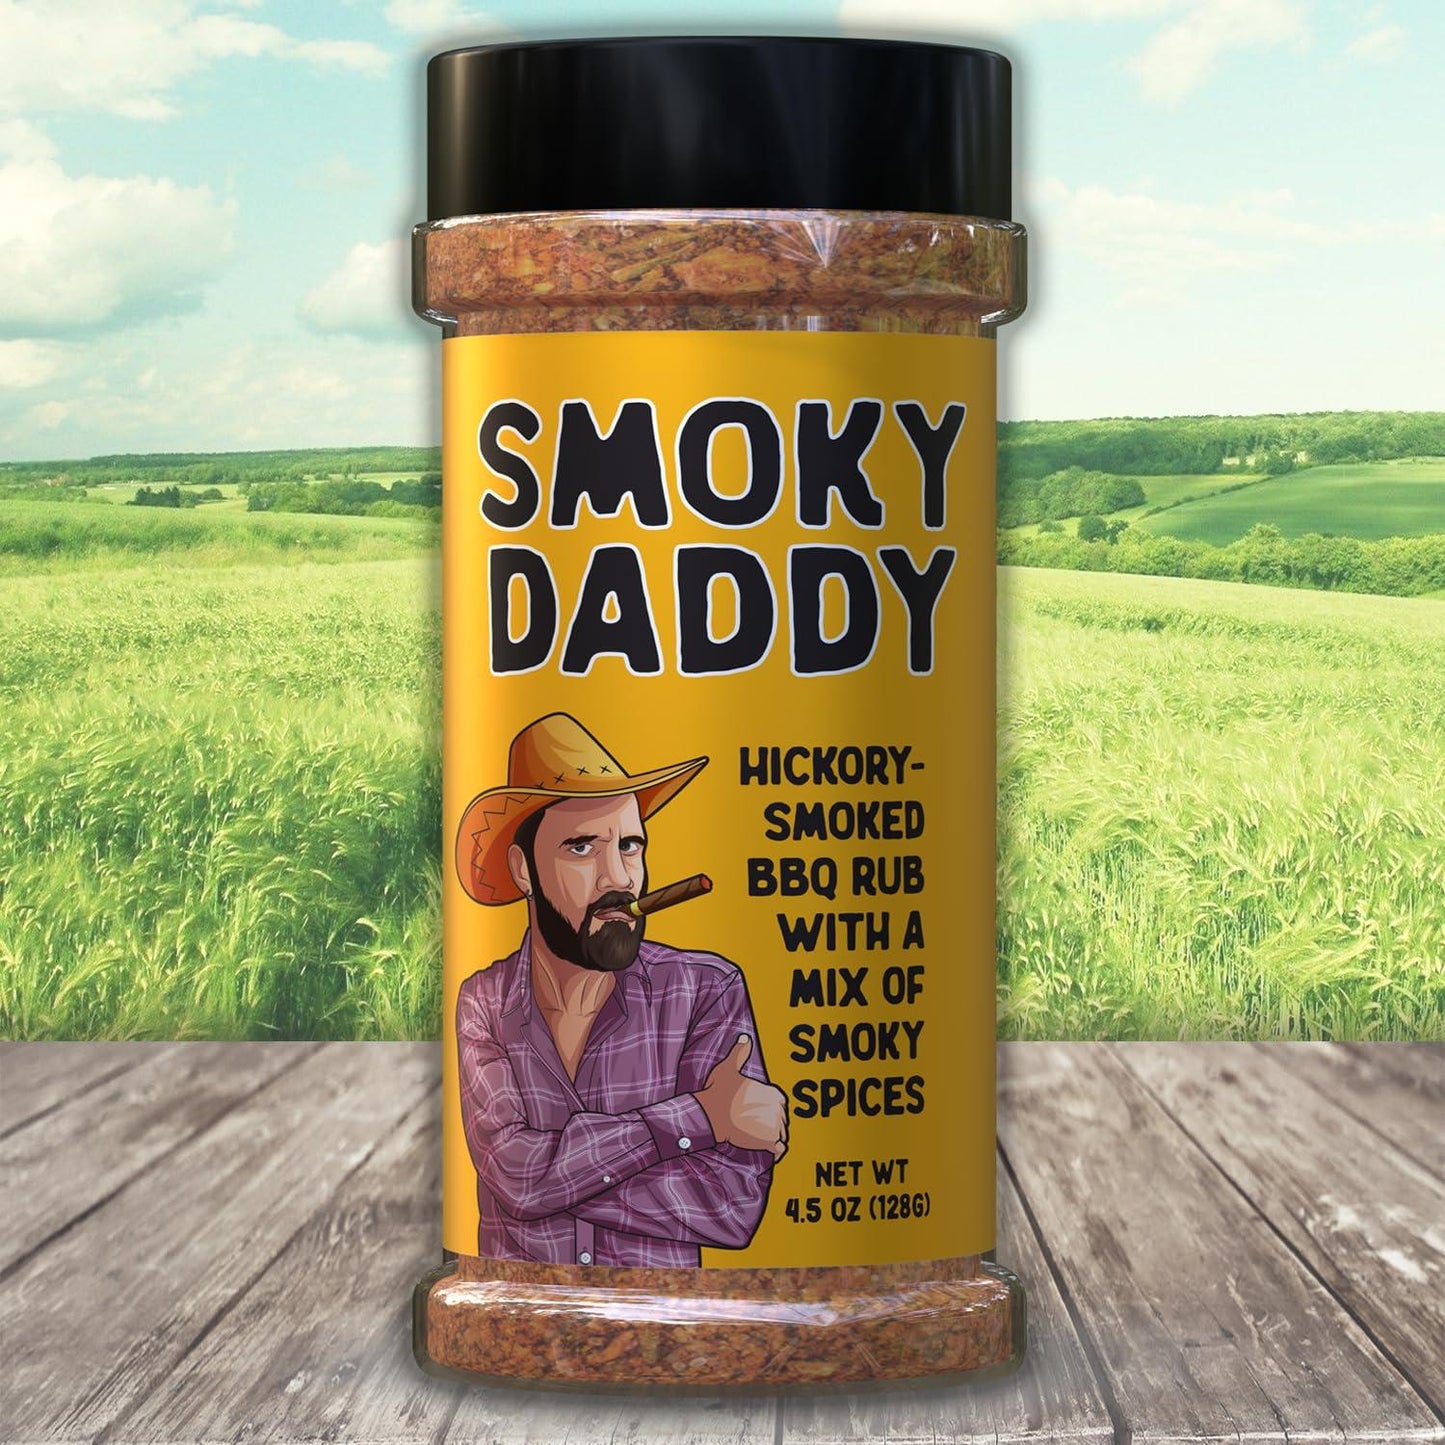 BBQ Rub Dad Gift Set -Sugar Daddy, Hot Daddy, Smoky Daddy. Barbecue Seasoning, Valentines Day Gift for Him Fathers Day Dad Gifts Christmas Stocking Stuffers for Dads Birthday Gifts for Men - CookCave